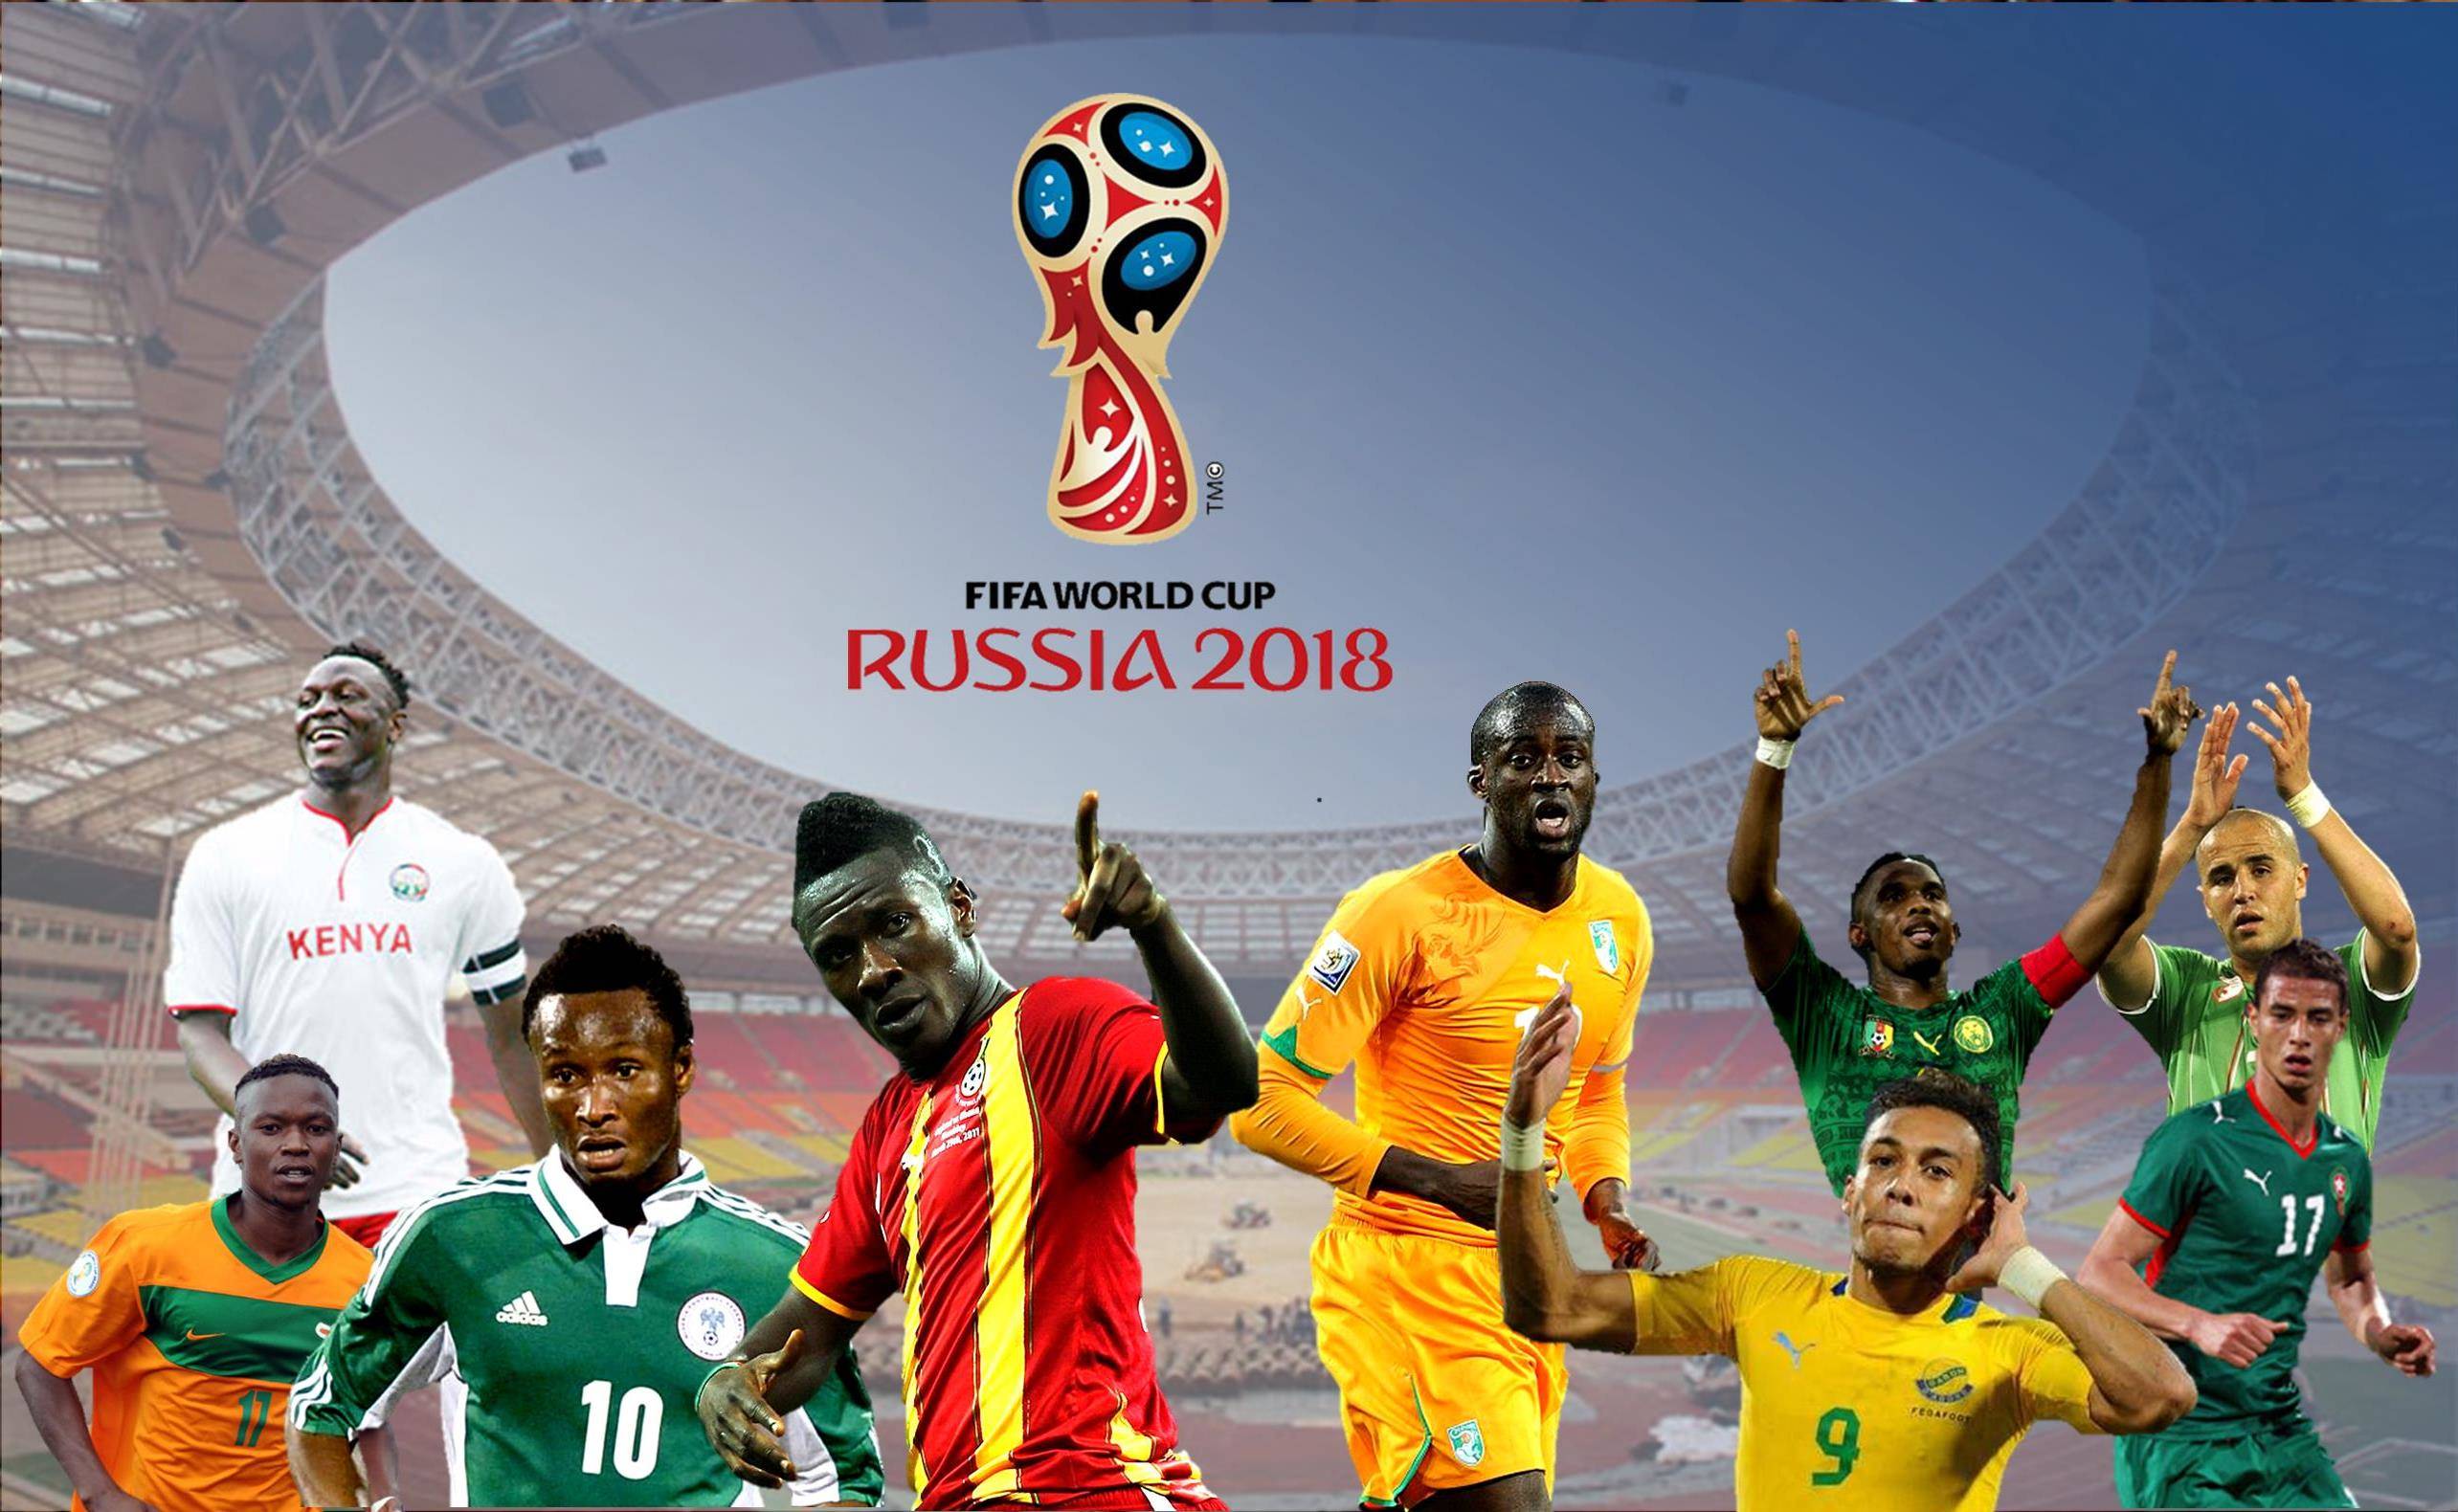 Review of 2018 Africa World Cup qualifiers